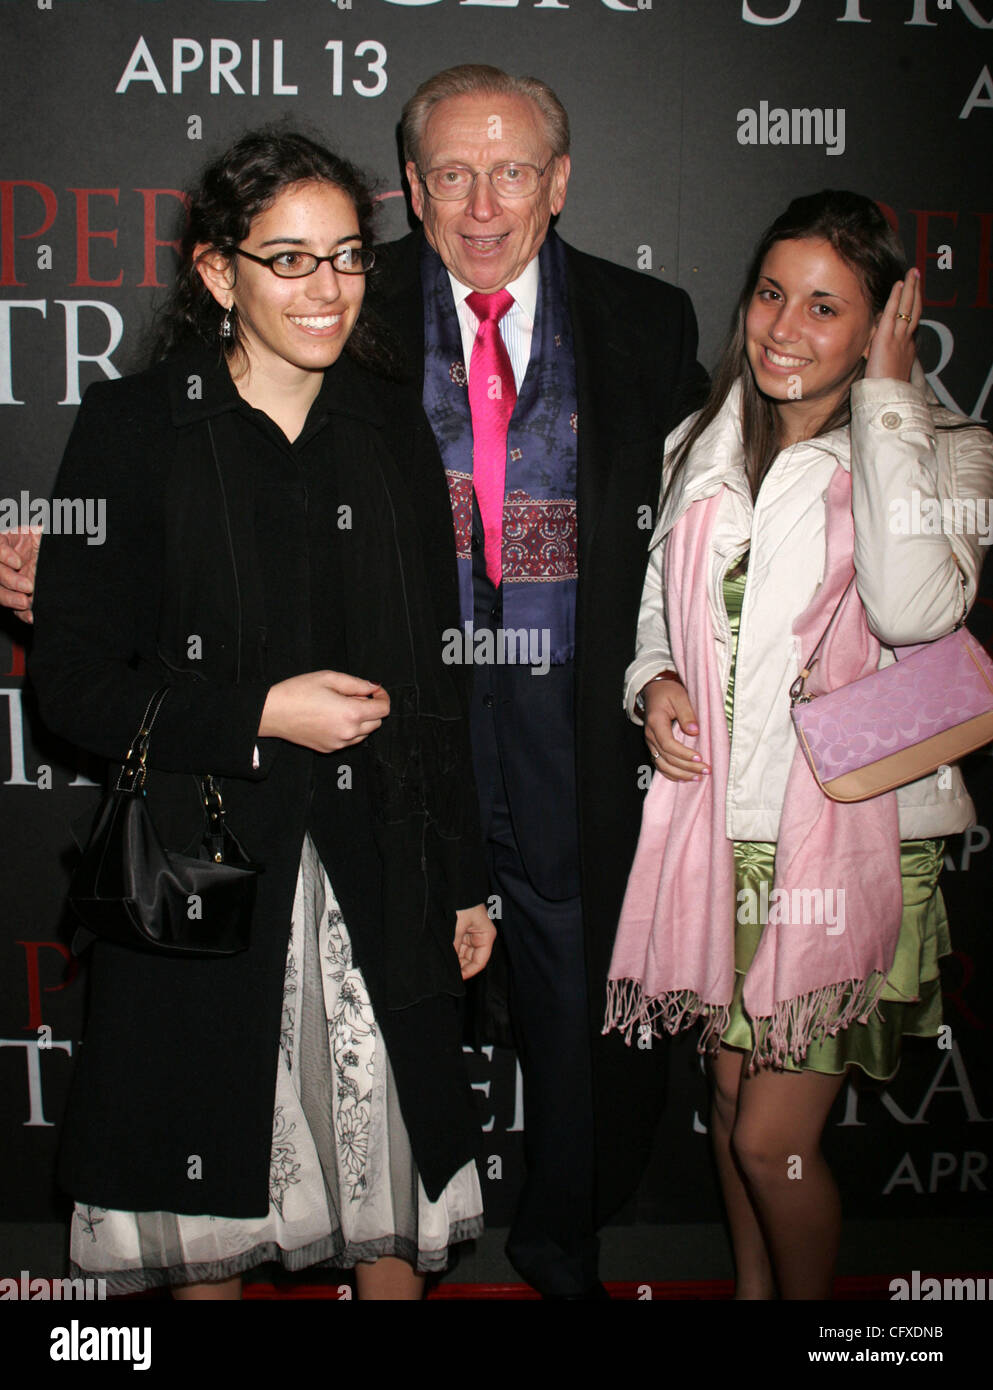 Apr 10, 2007 - New York, NY, USA - LARRY SILVERSTEIN and DAUGHTERS at the arrivals for the New York premiere of 'Perfect Stranger' held at the Ziegfeld Theater. (Credit Image: © Nancy Kaszerman/ZUMA Press) Stock Photo